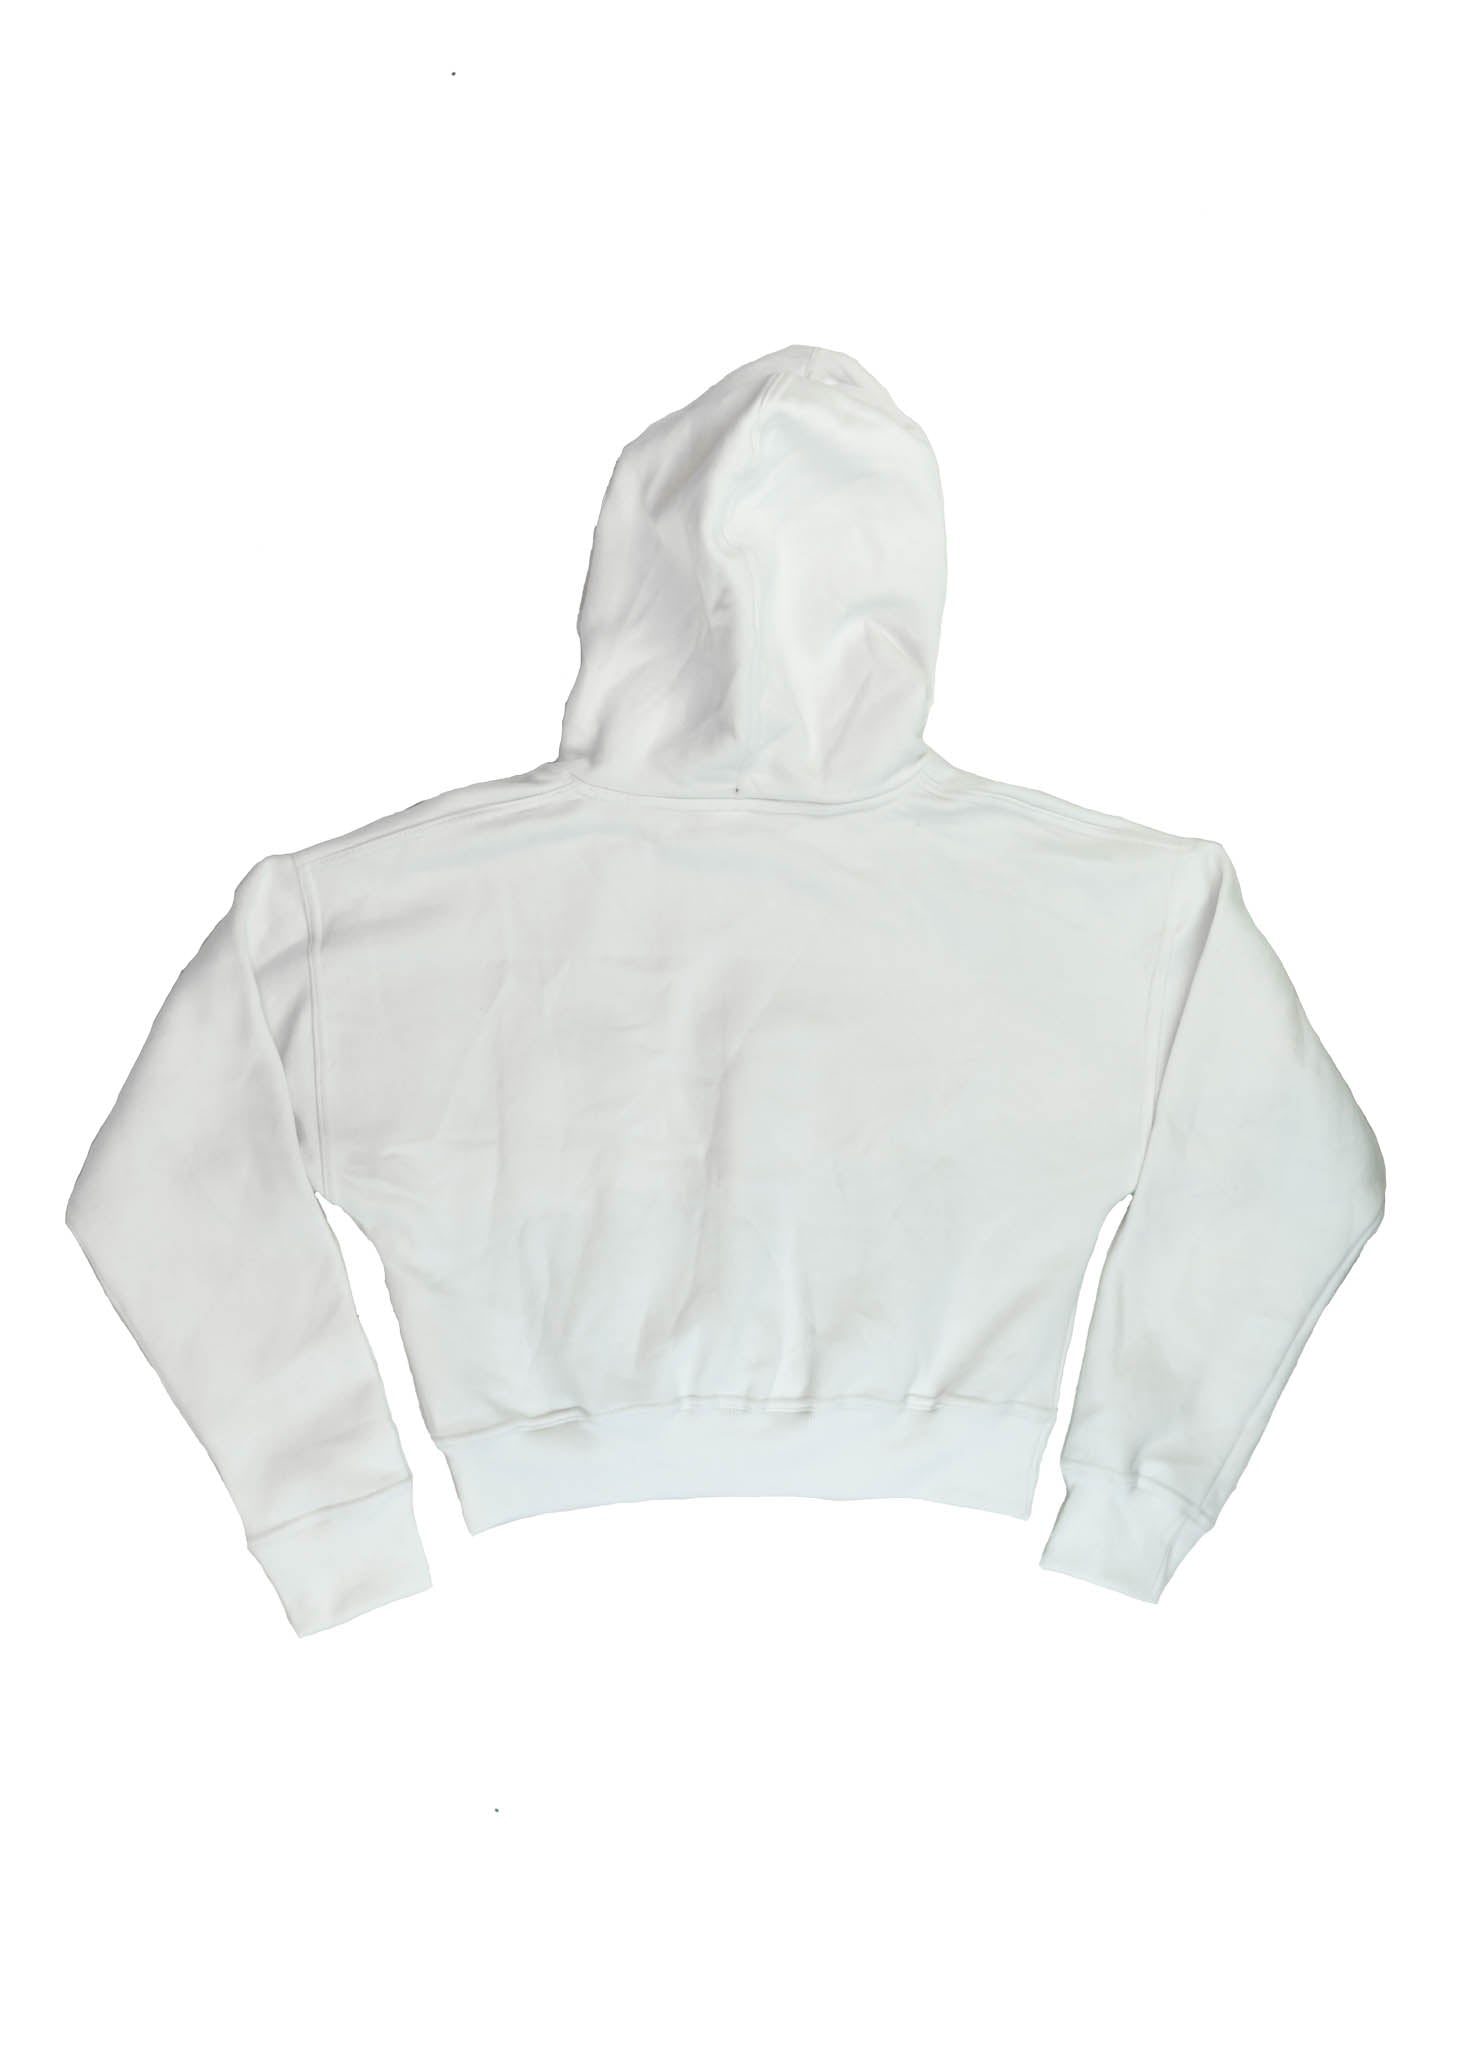 A white Volvo cropped hoodie for women. Photo is a back view of the cropped sweater with an embroidered 850R. Fabric composition is 100% cotton. The material is soft, comfortable, breathable, and non-transparent. The style of this crop hoodie is long sleeve, crewneck with a hood, hooded, with embroidery on the chest.